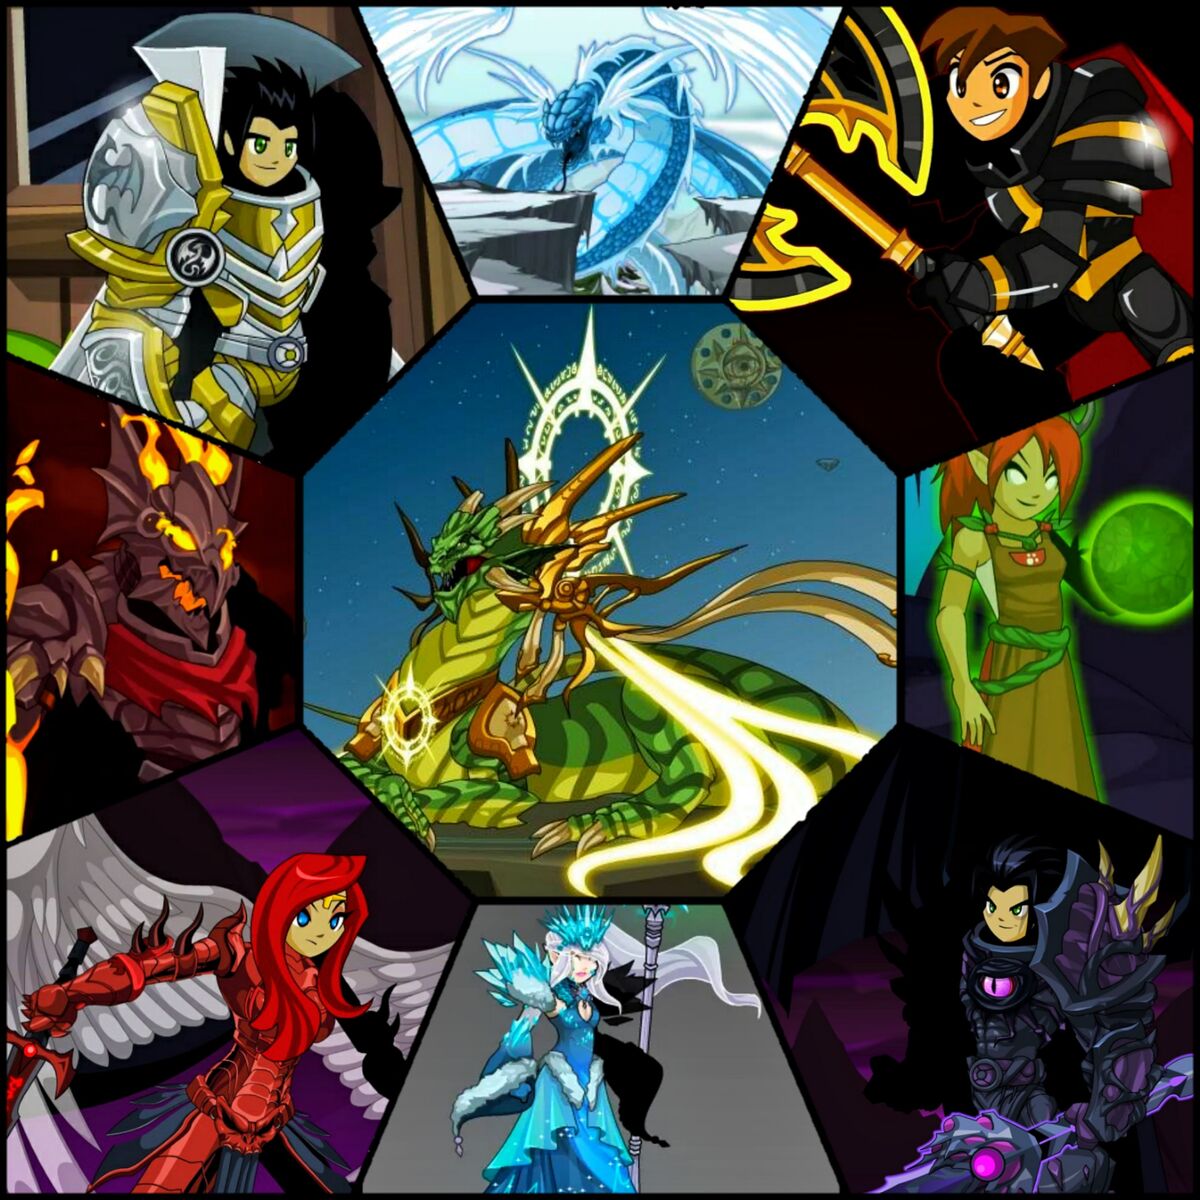 13 Lords of Chaos, AdventureQuest Worlds Wiki